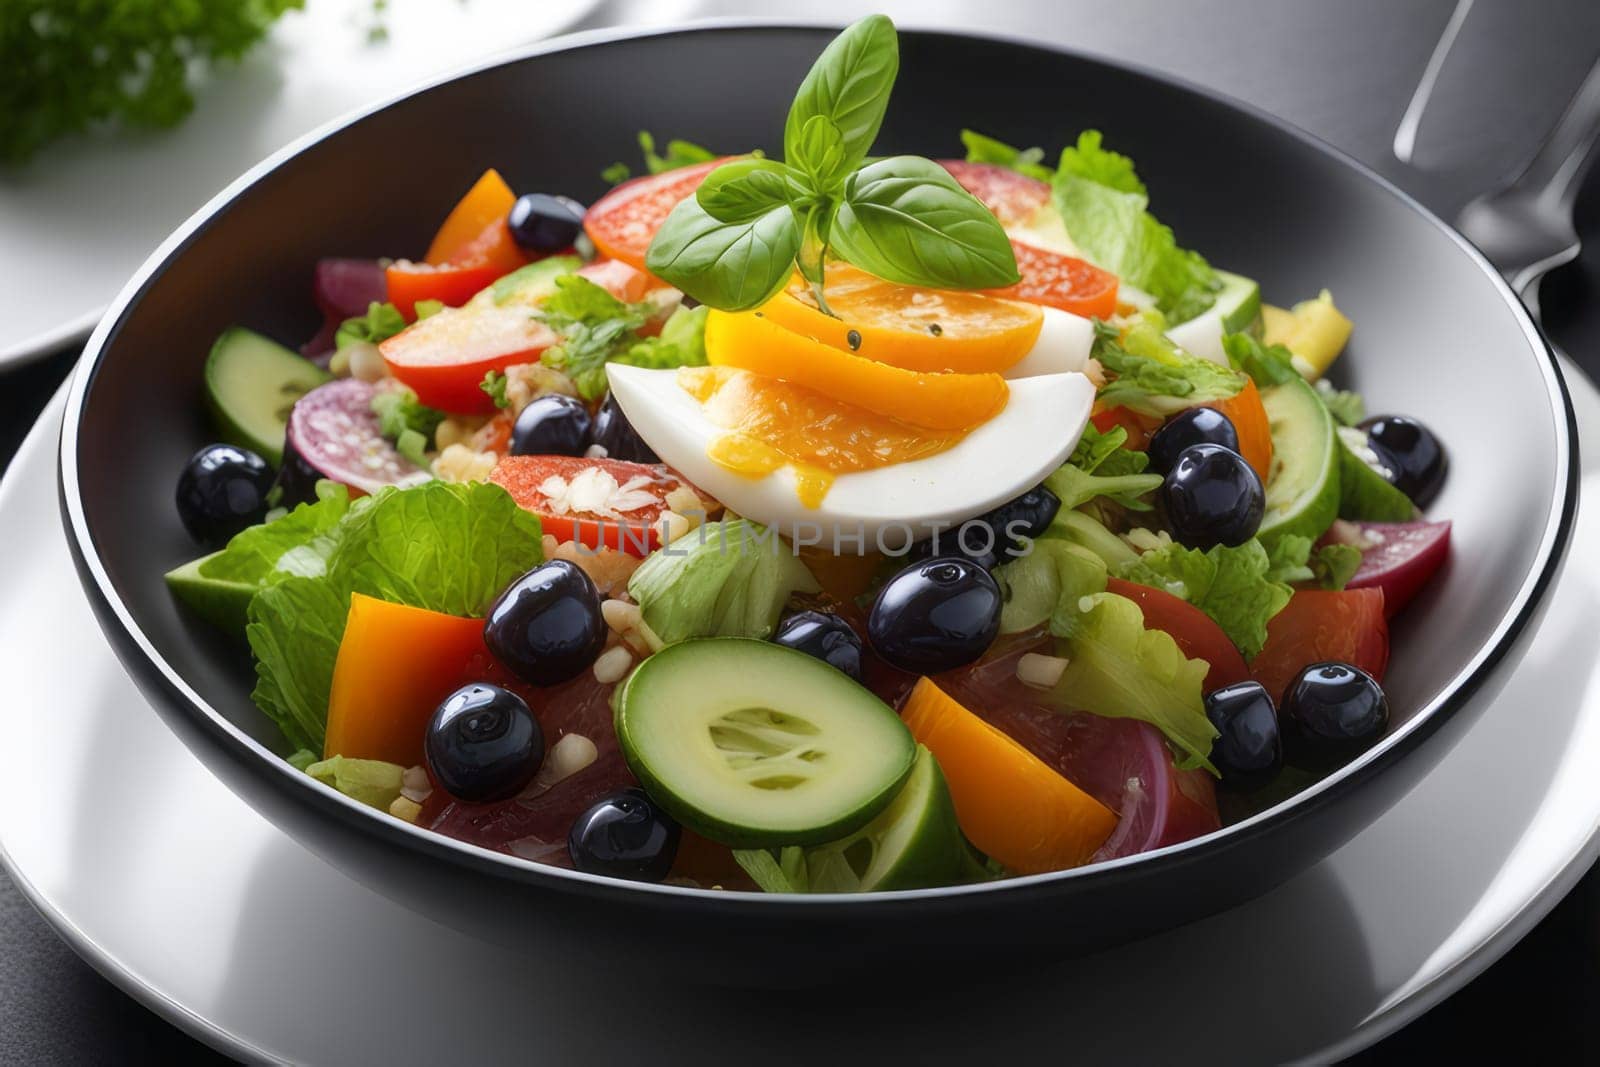 Fresh and colorful vegetarian salad presented in a deep dish on a café table, showcasing a harmonious composition against the clean white background by Annu1tochka